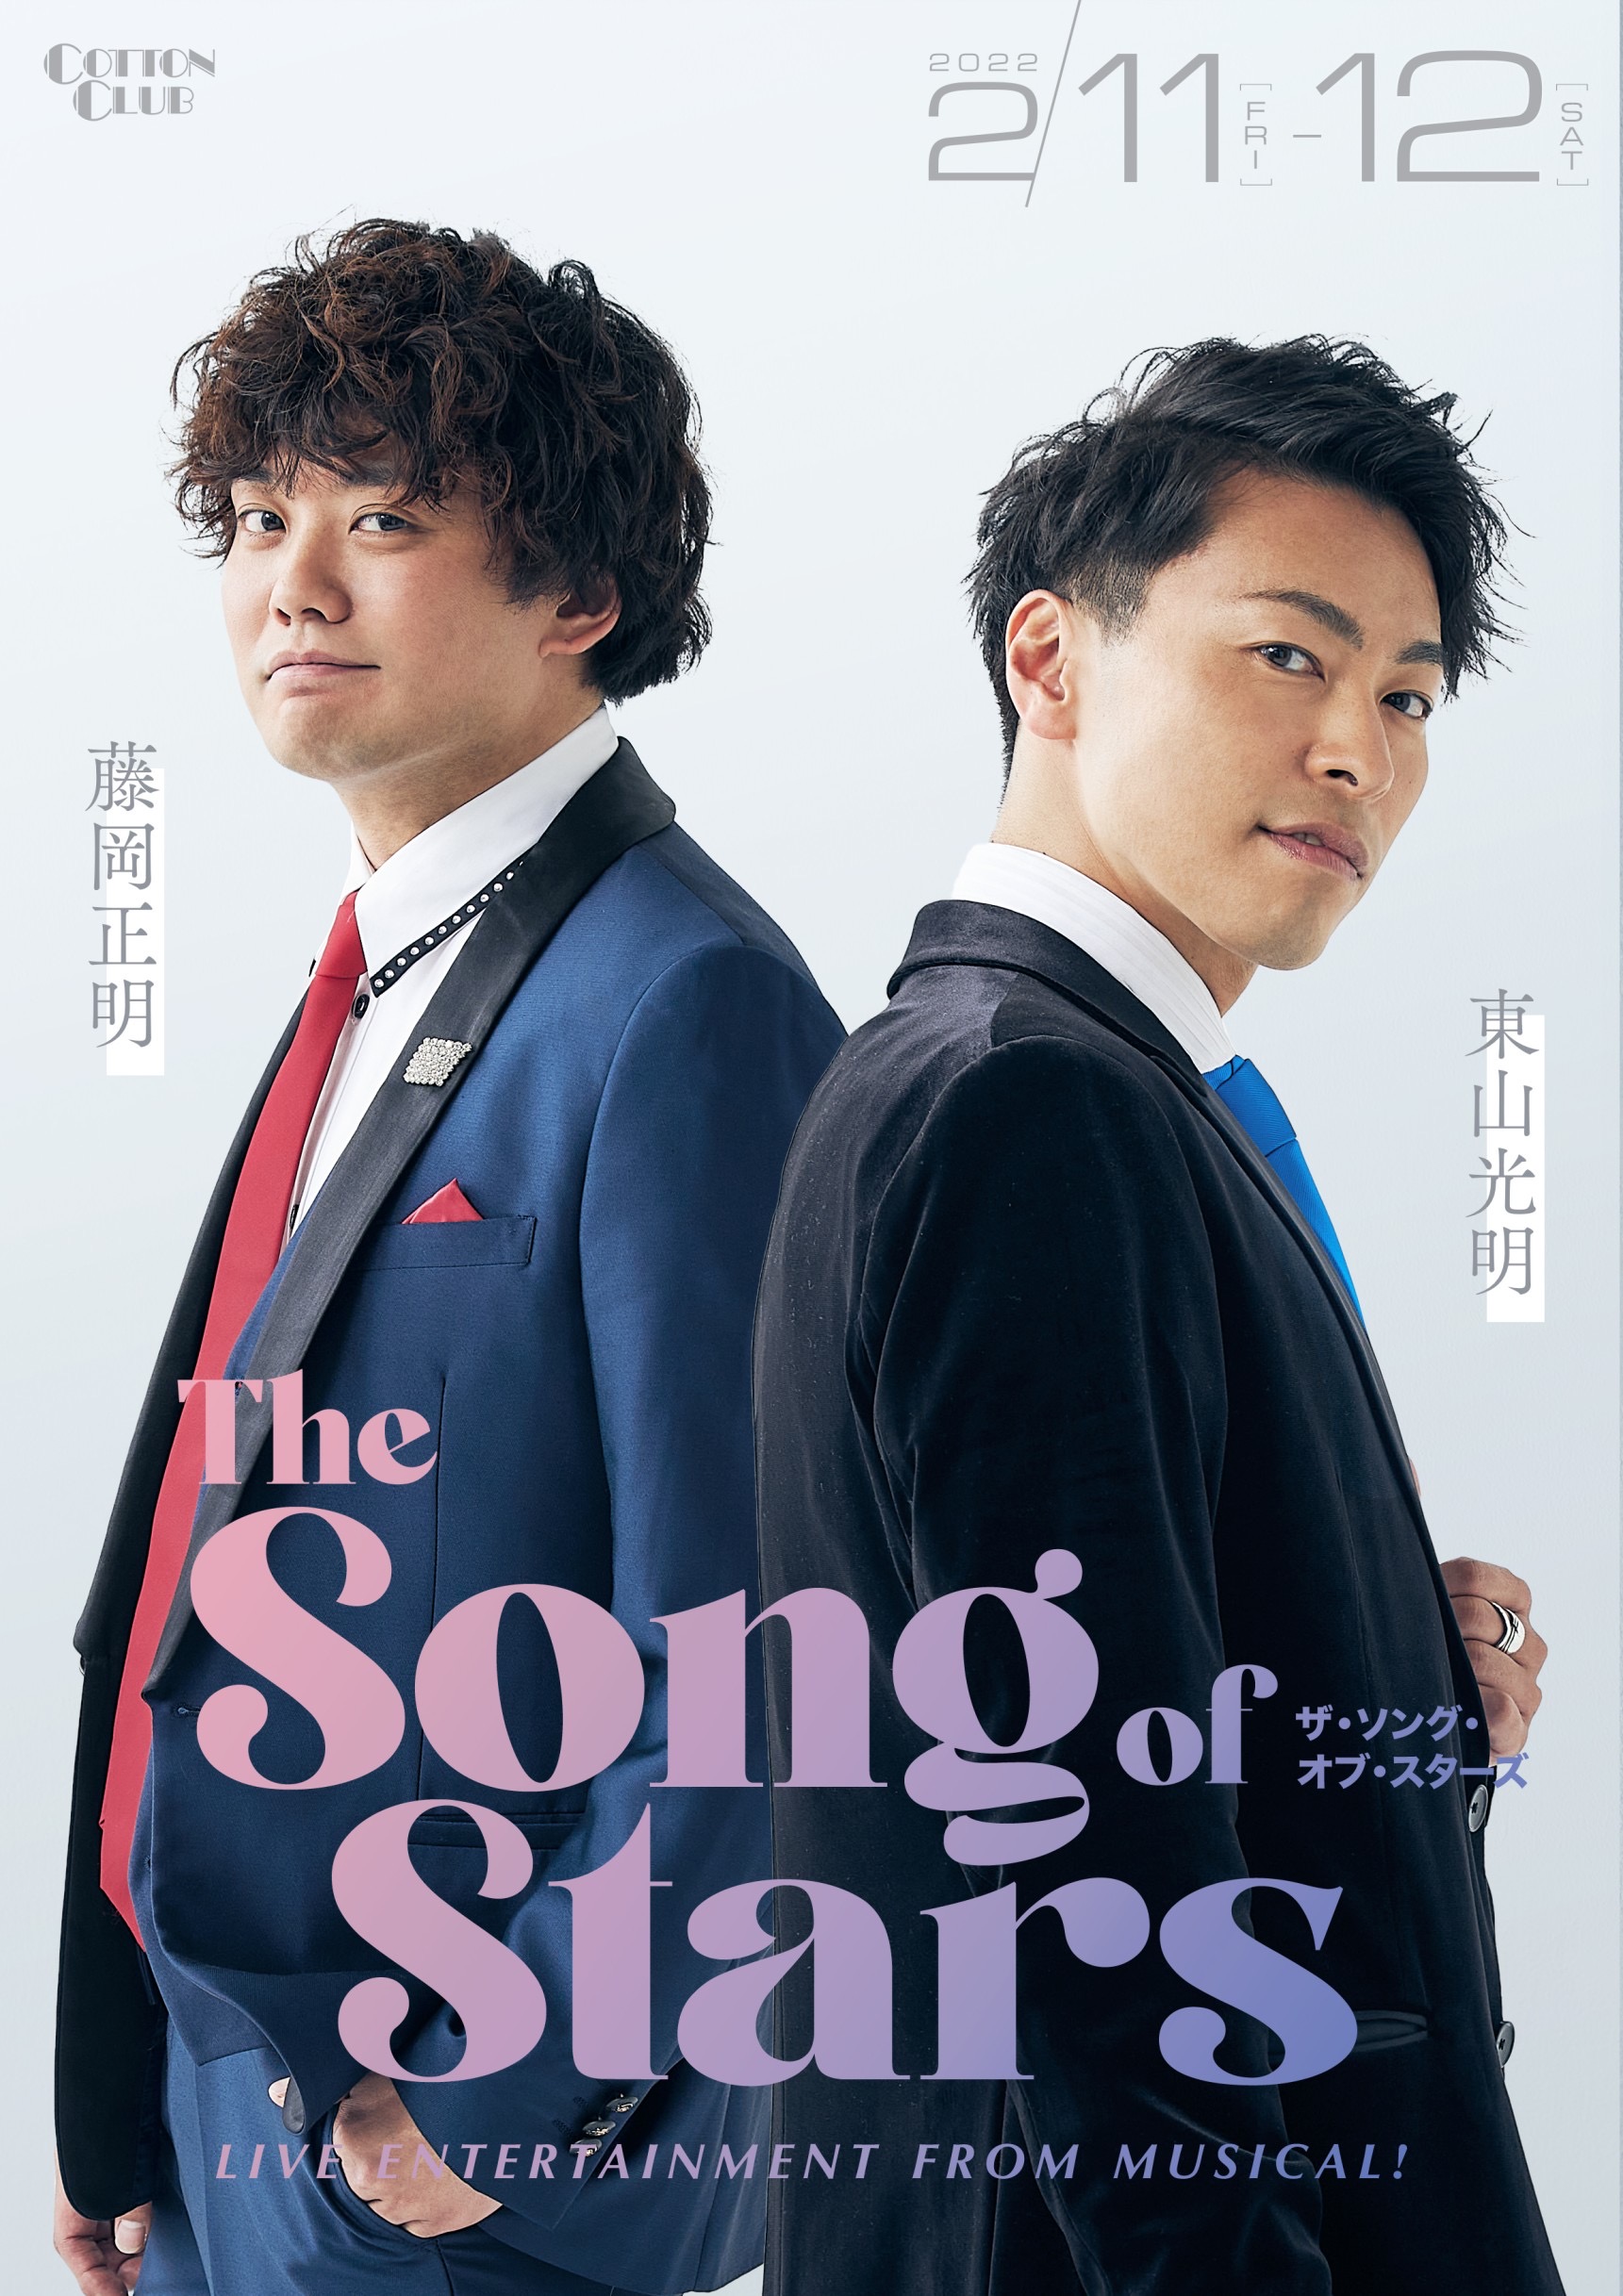 【2/12 1st.show】東山光明×藤岡正明『The Song of Stars』 ～Live Entertainment from Musical～